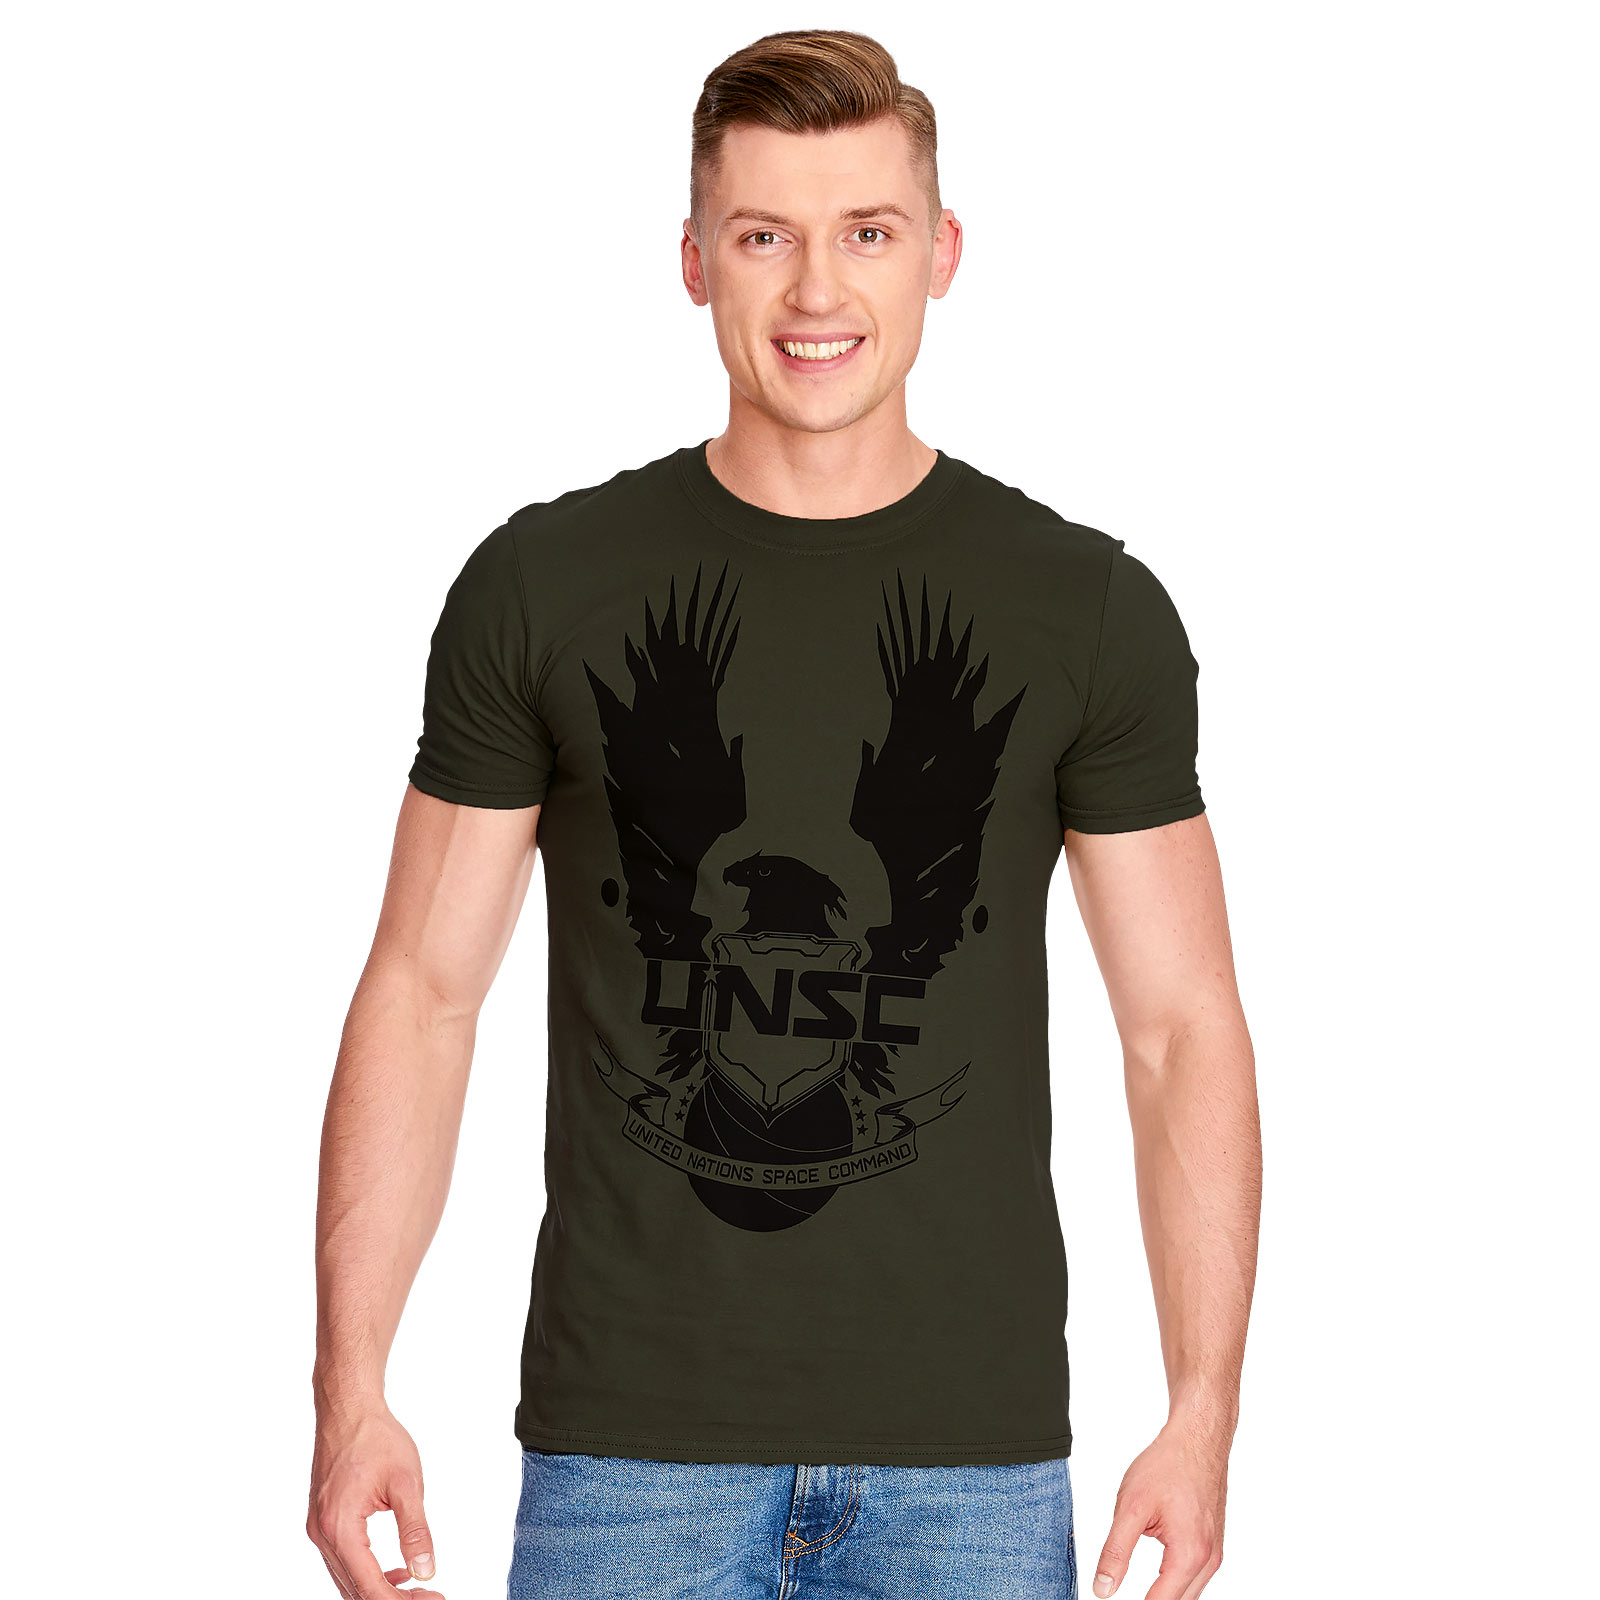 Halo - UNSC T-Shirt olive